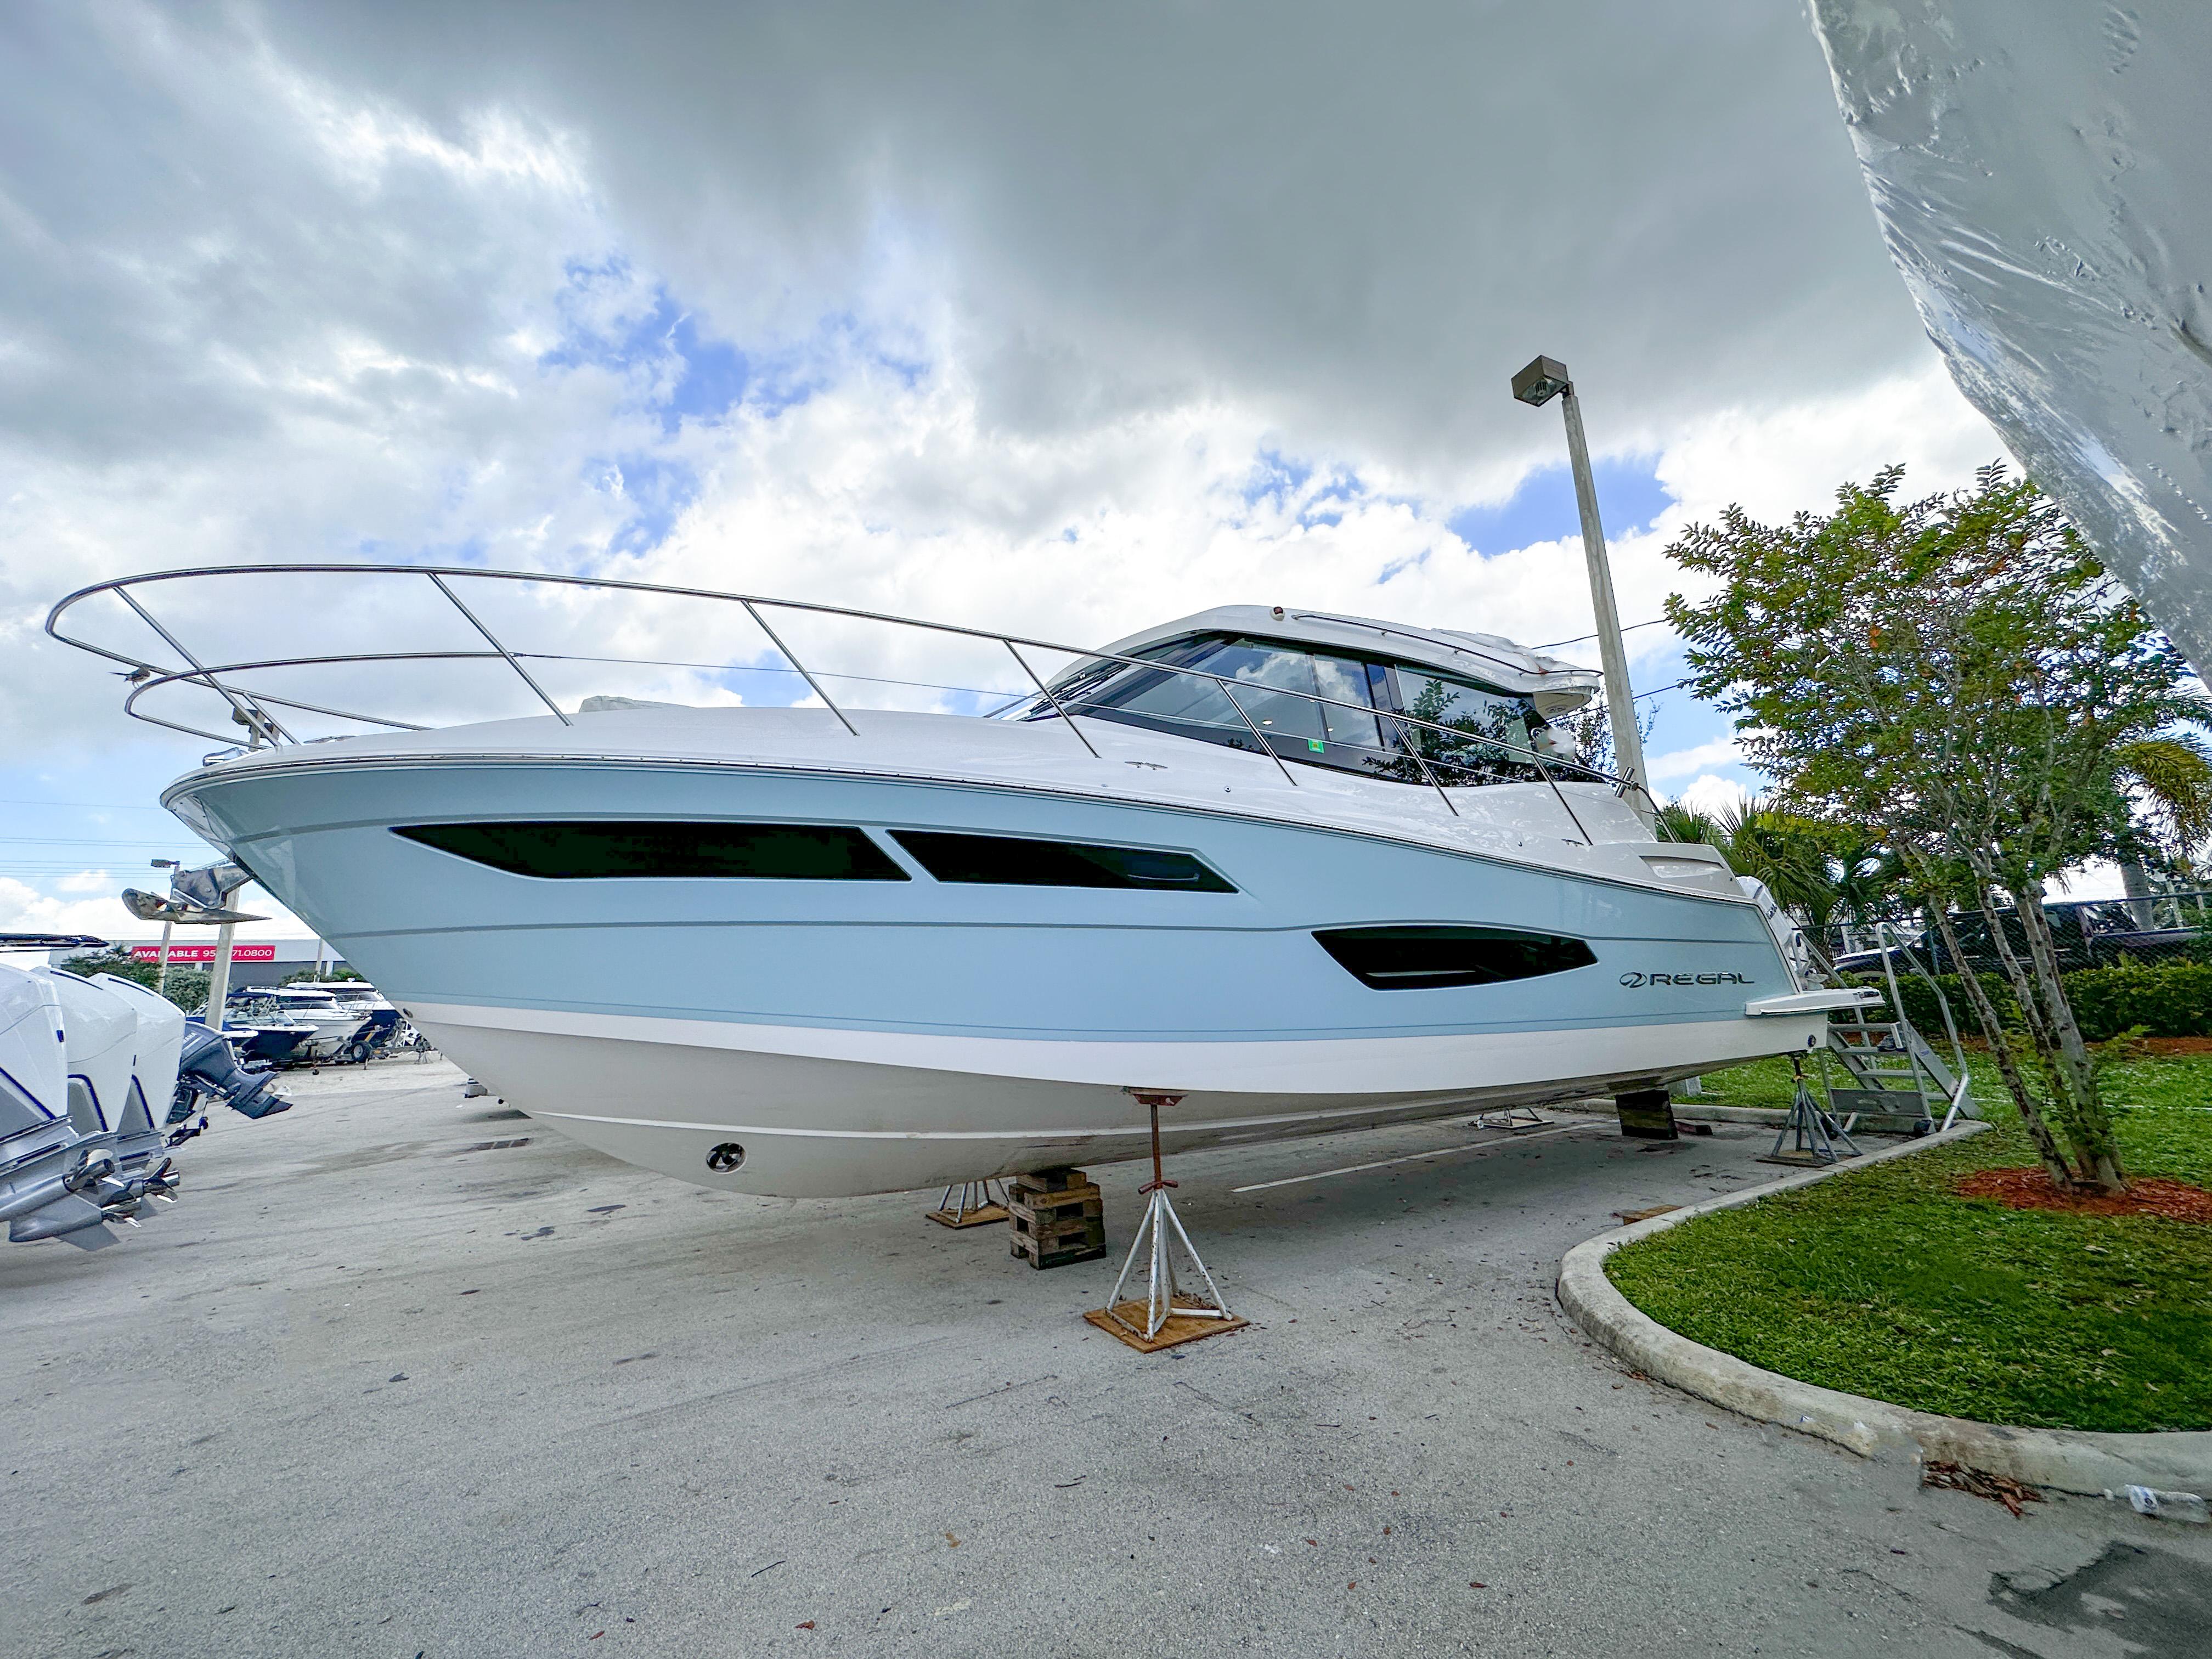 Regal 42 Xo boats for sale - Boat Trader